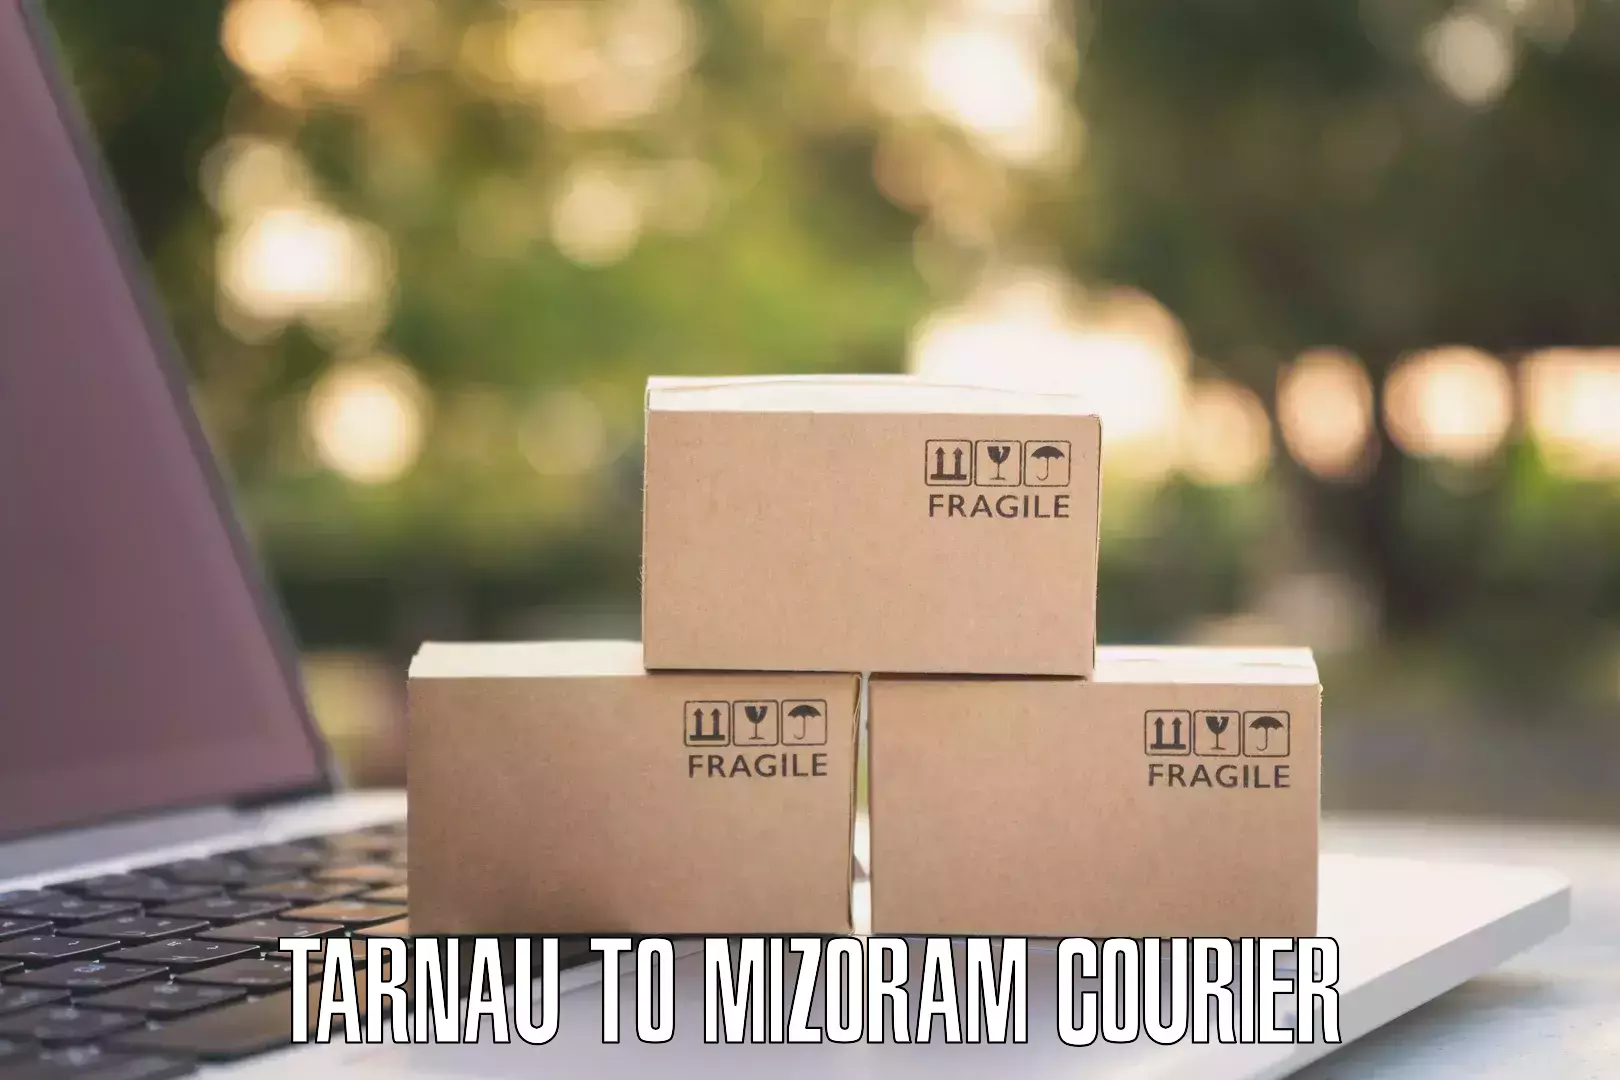 Customized delivery options Tarnau to Darlawn